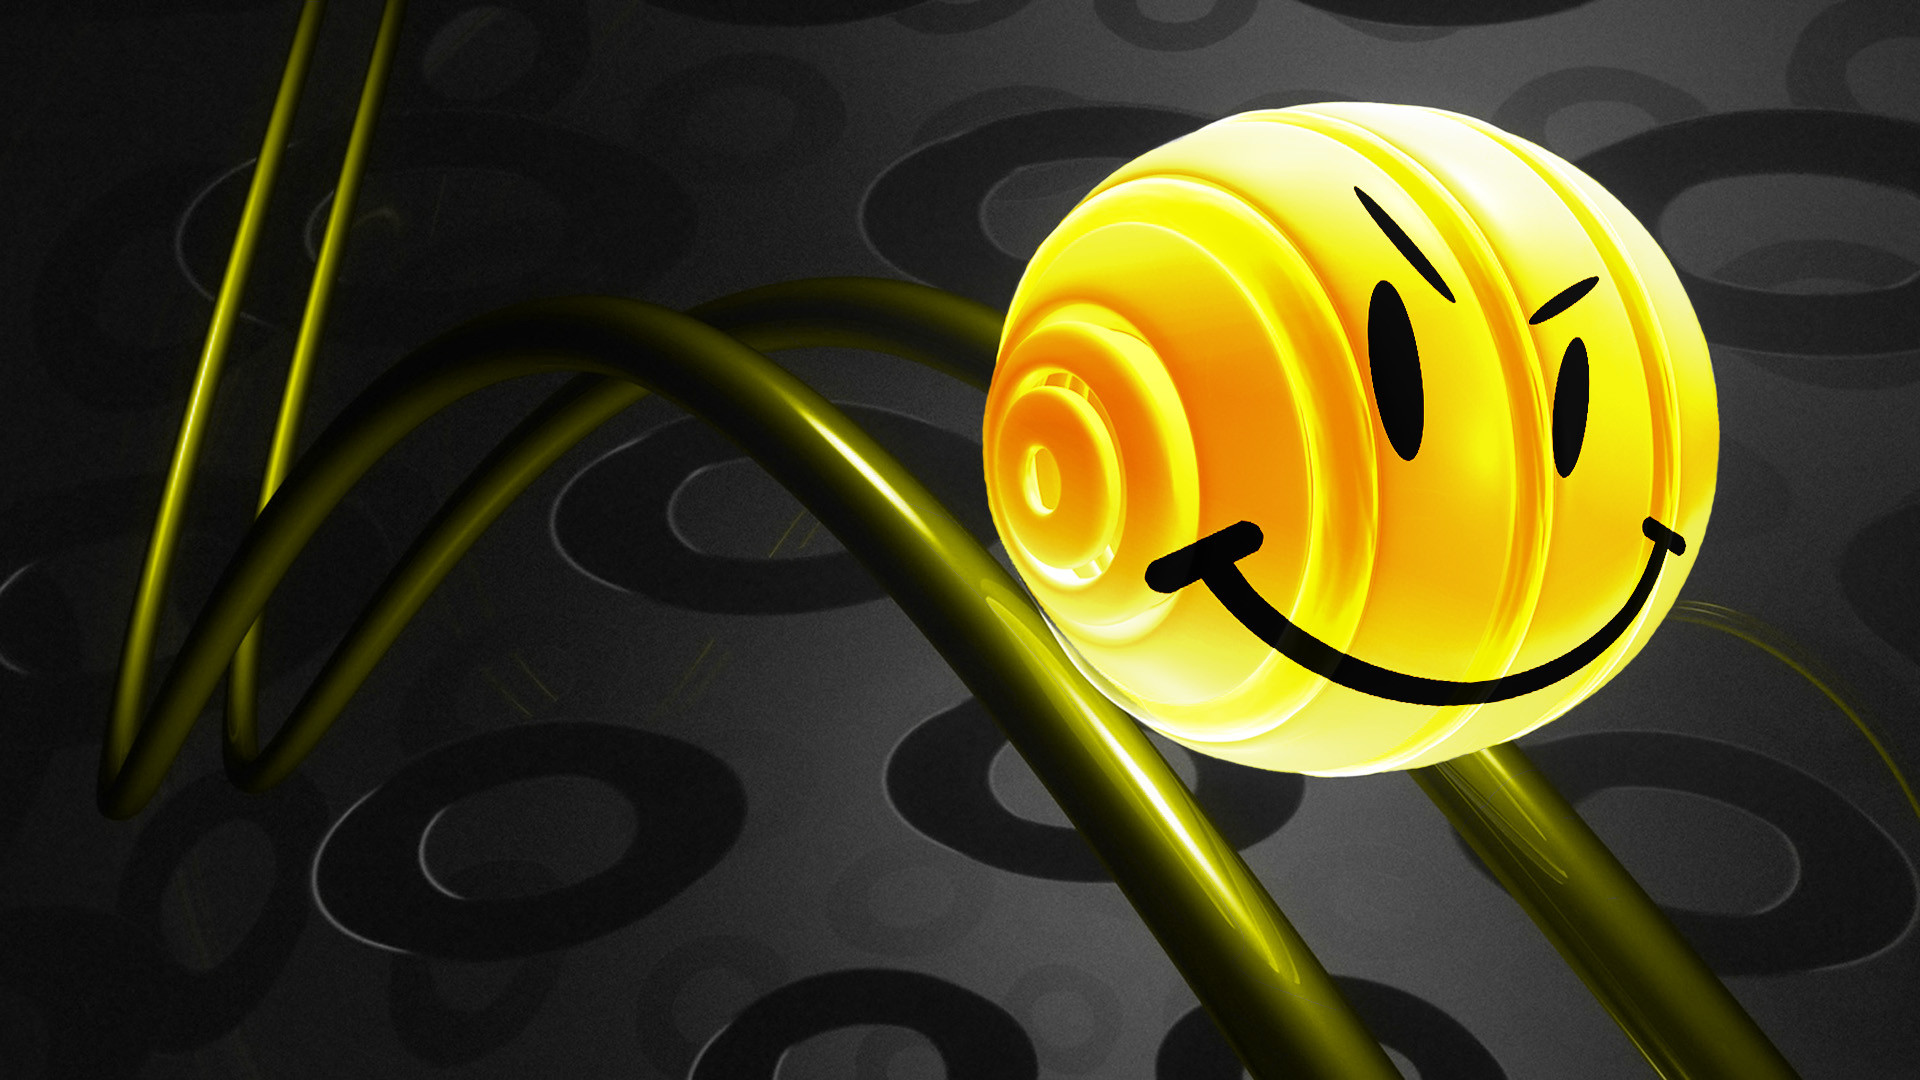 smiley face wallpaper hd,yellow,emoticon,games,close up,smile